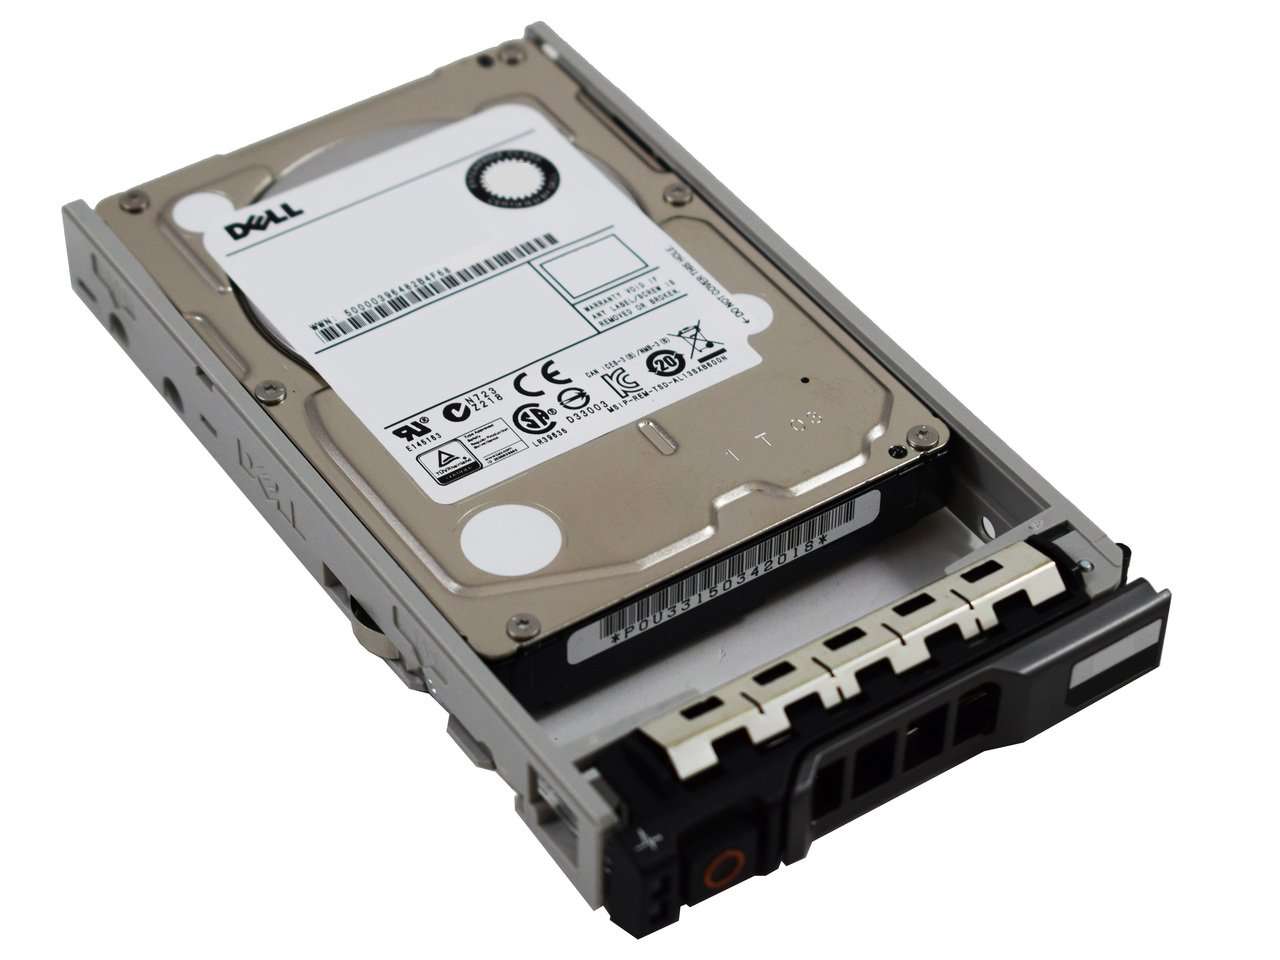 Dell G13 463-0052 600GB 15K RPM SAS 6Gb/s 512n 2.5" Manufacturer Recertified HDD